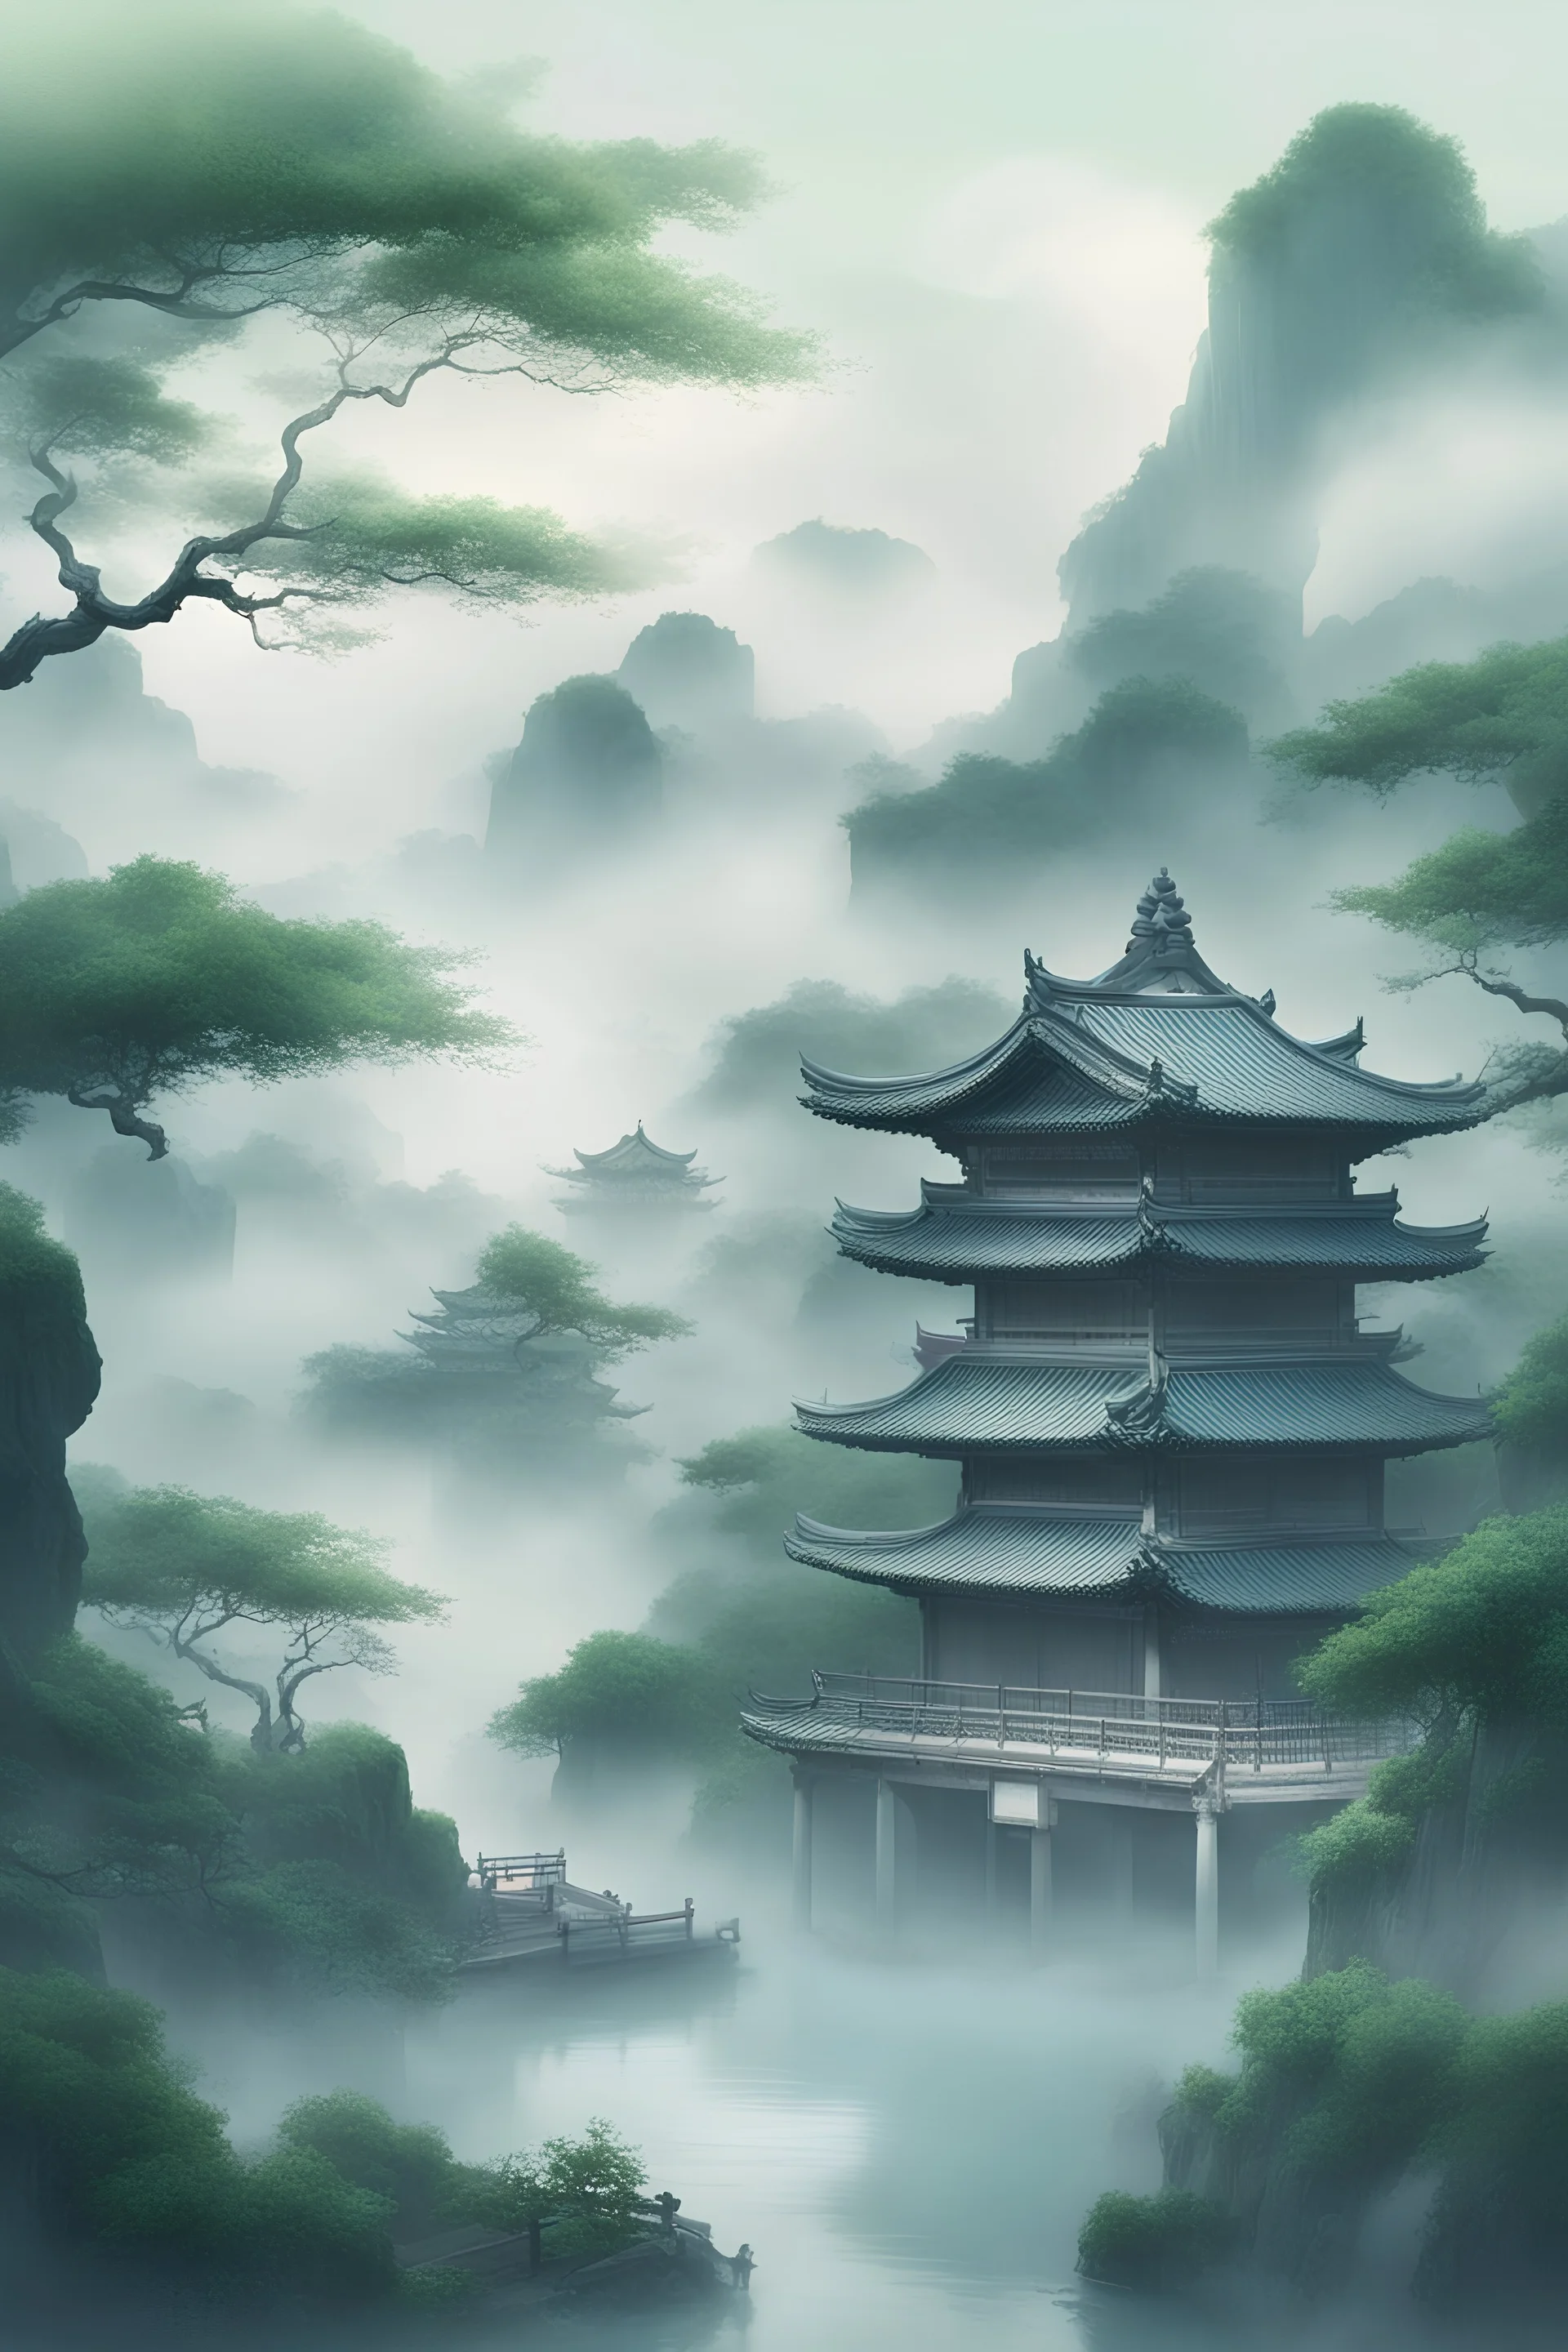 Jiangnan, green wind, clouds and mist, a little tender green and blue, ancient style, poetry and illustration, very clear and delicate. There are no pavilions.